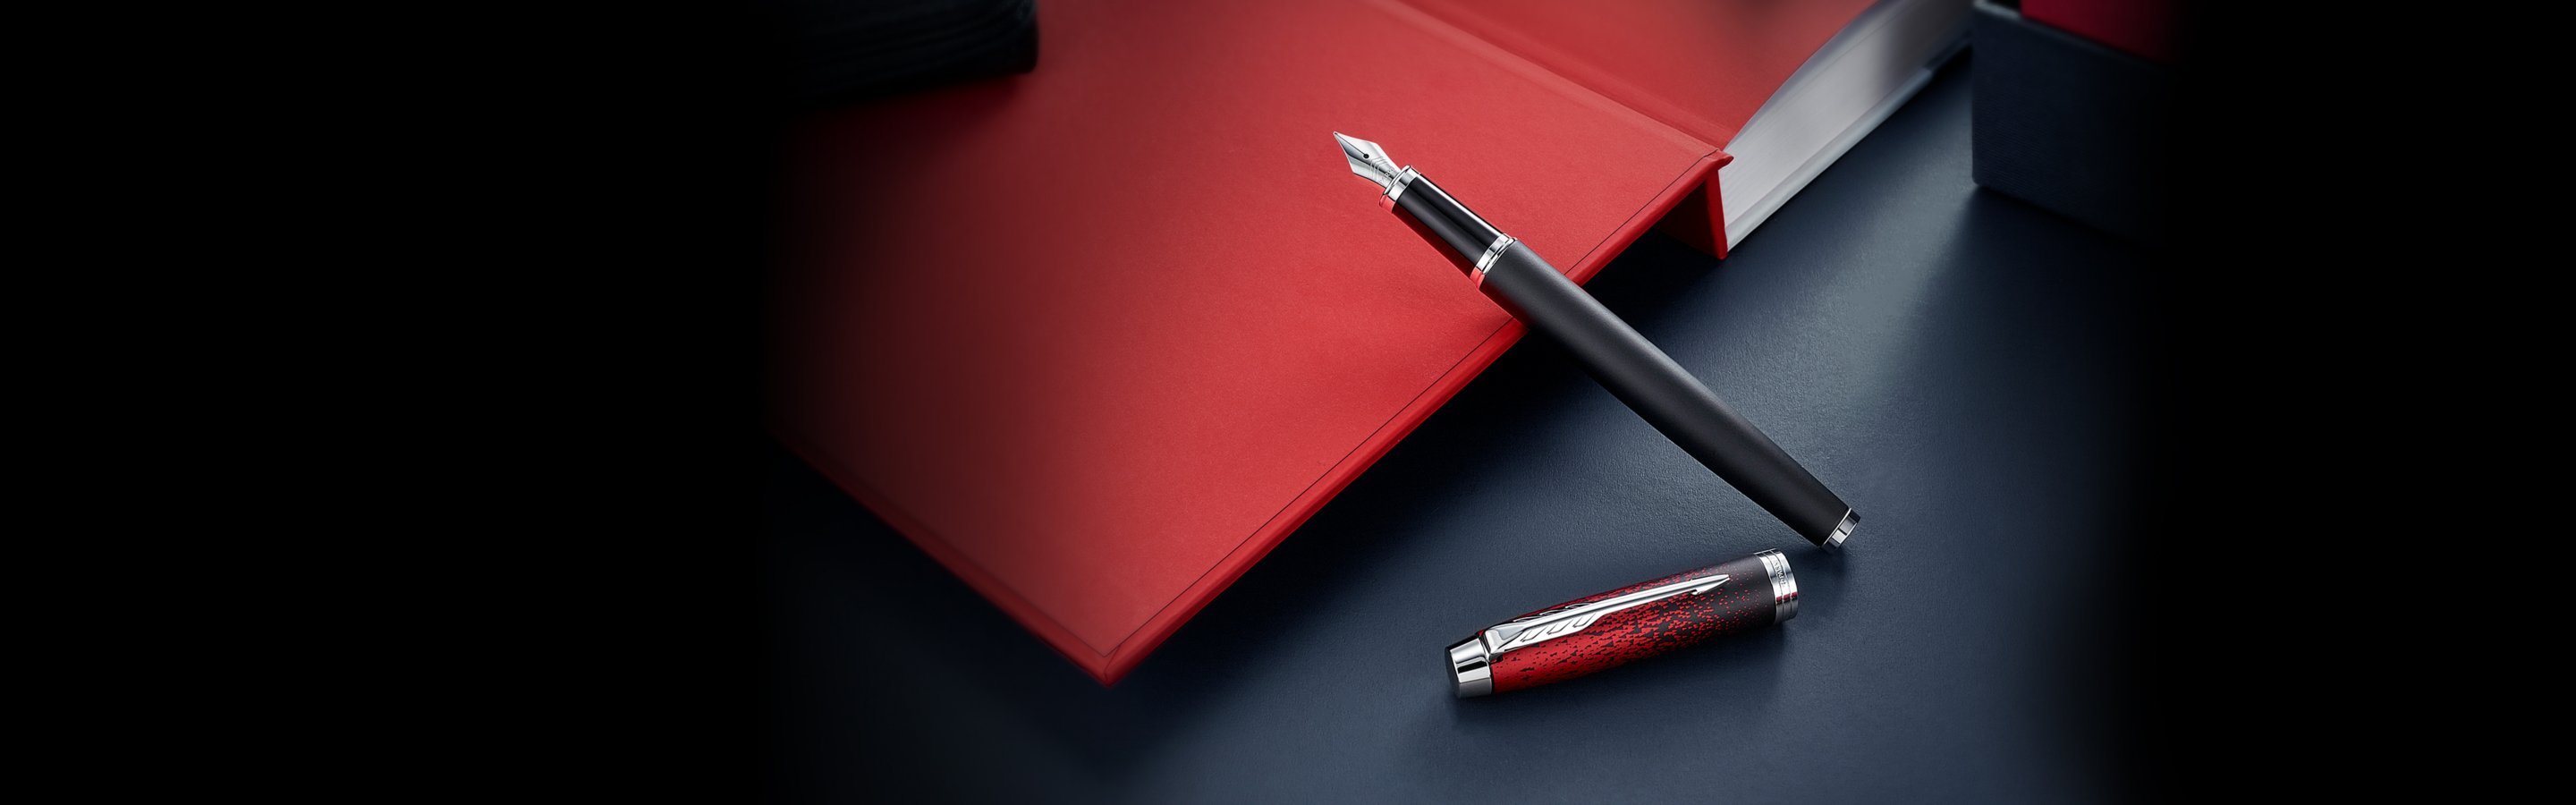 An uncapped Parker IM special edition red ignite fountain pen leaned against an opened book cover.